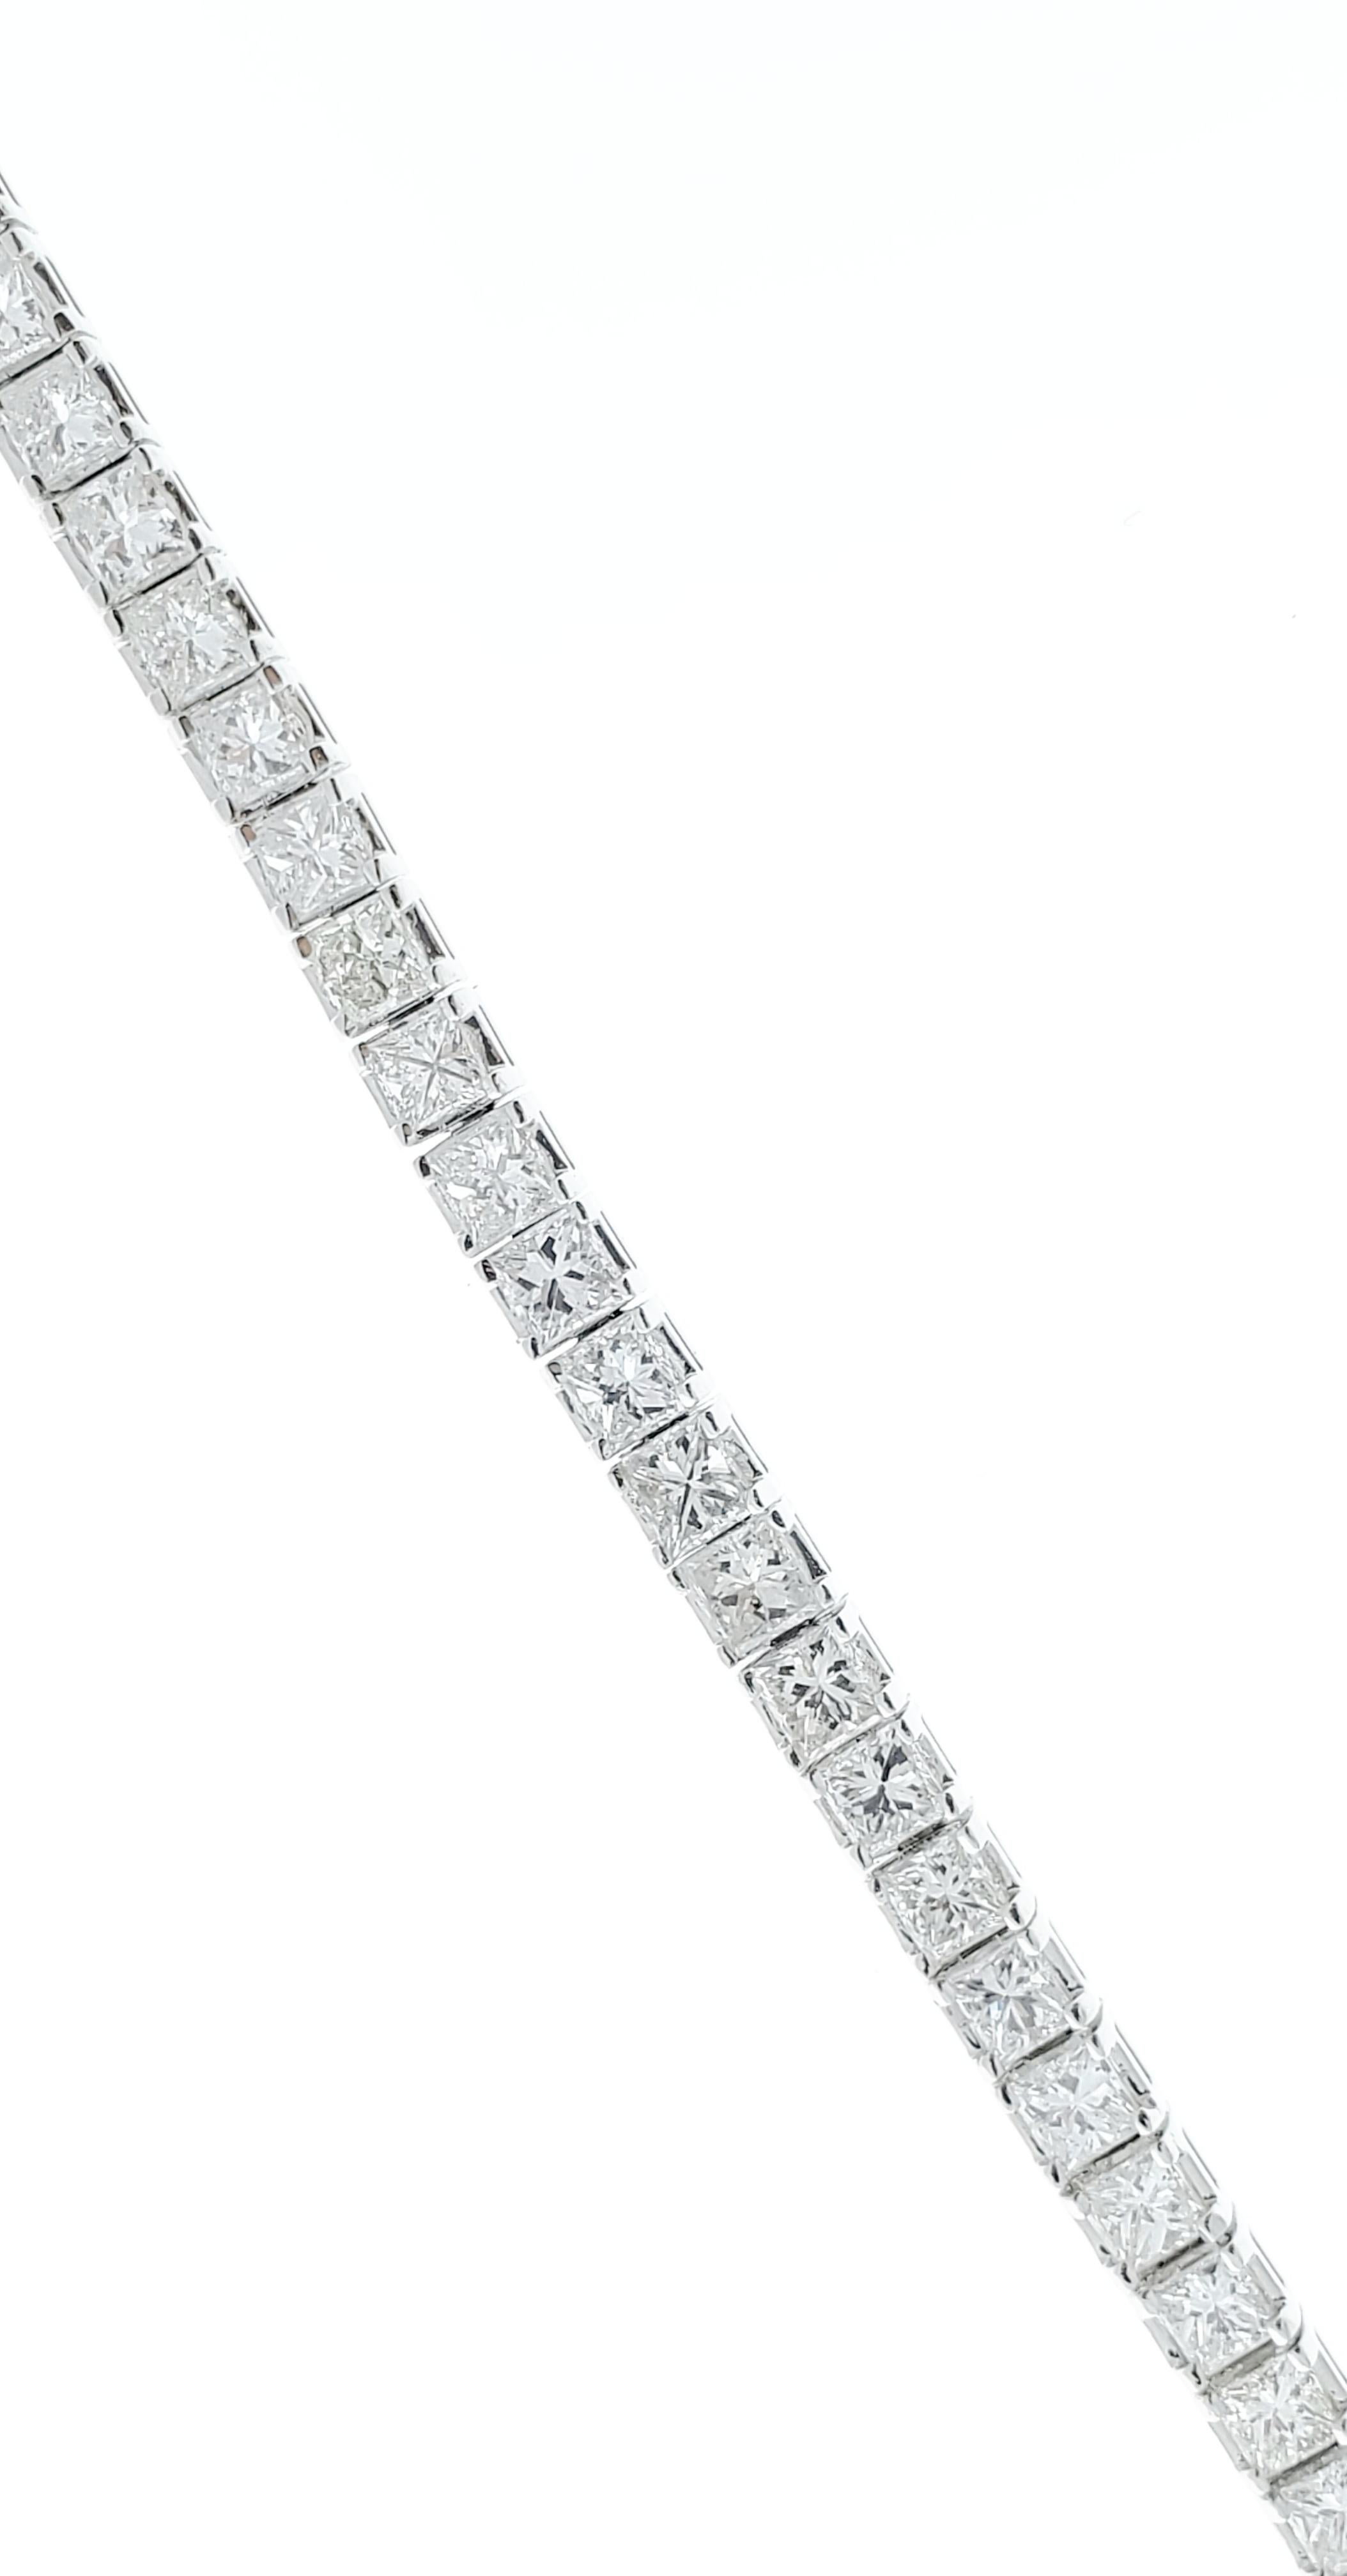 This spectacular brightly polished 14 karat white gold tennis bracelet showcases a stunning 7.30 carats of princess cut diamonds that measure 3mmx3mm each. These scintillating diamonds have a clarity of VS-SI and color G. A total of 56 diamonds are